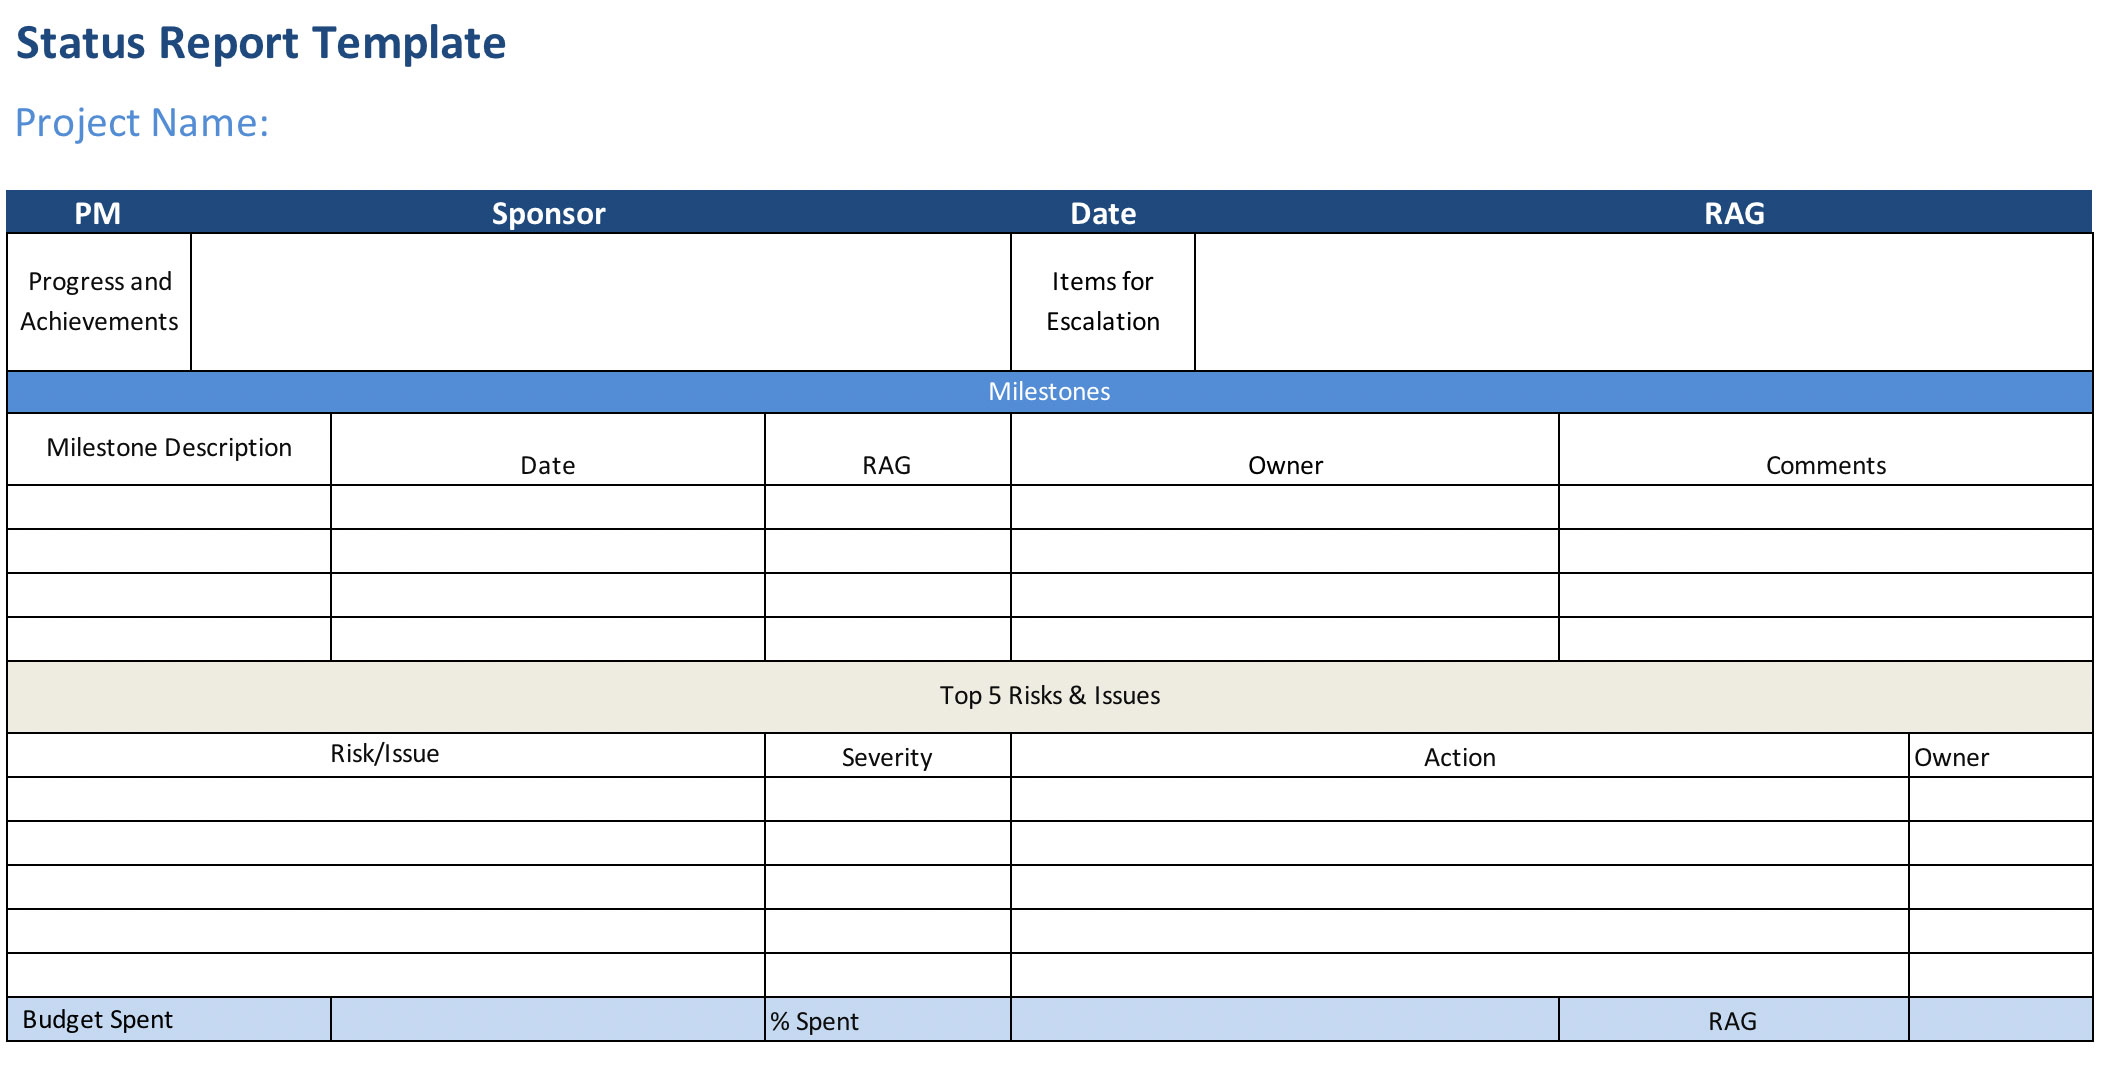 20 Free Project Report Templates (Weekly Status Report Included) Regarding Project Manager Status Report Template